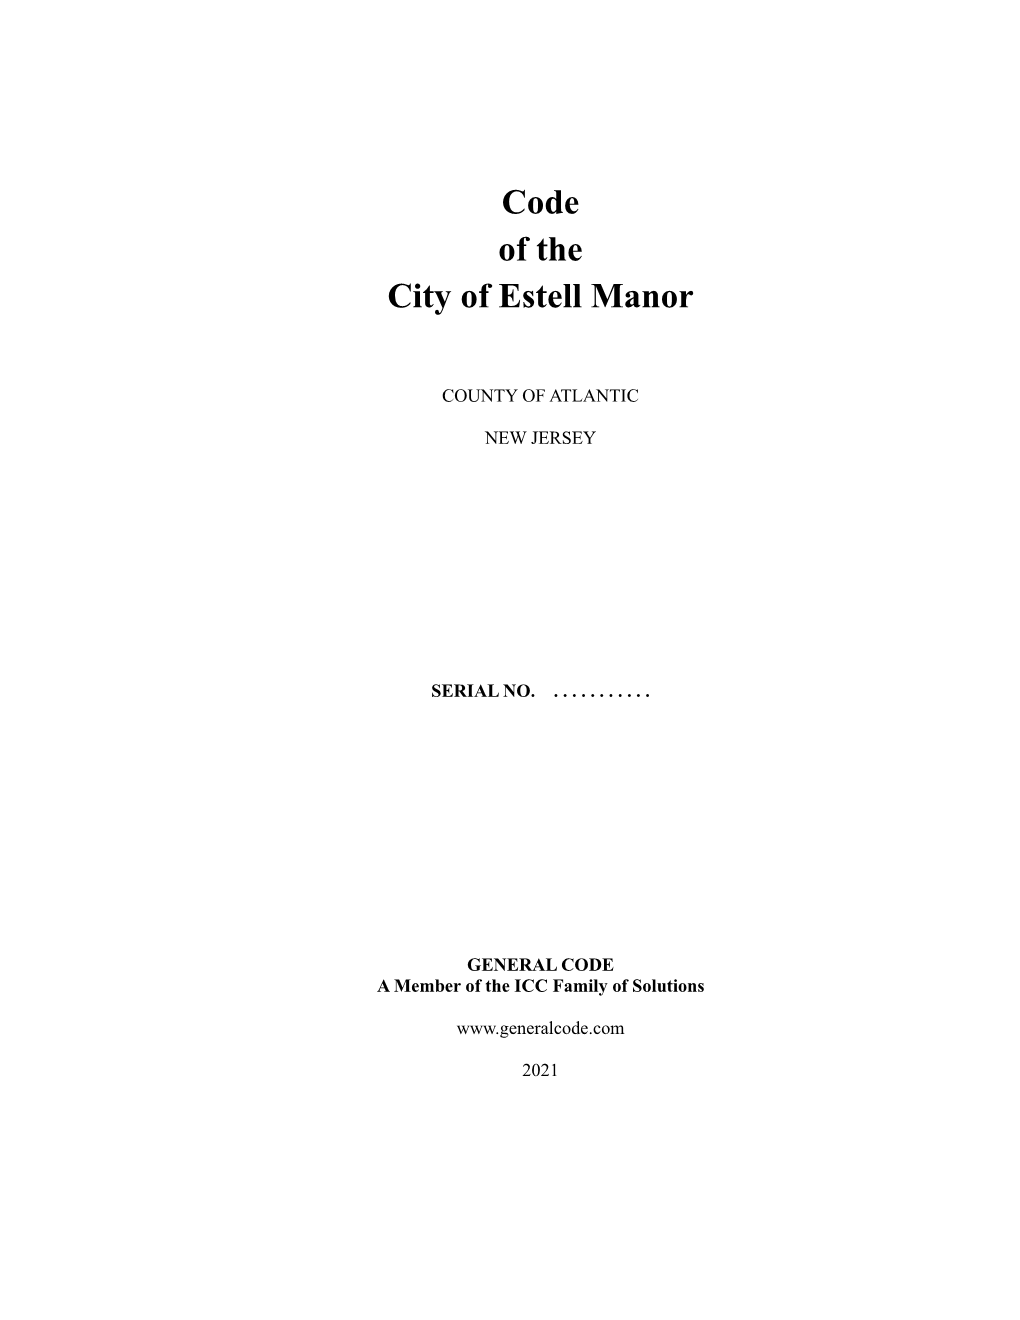 Code of the City of Estell Manor